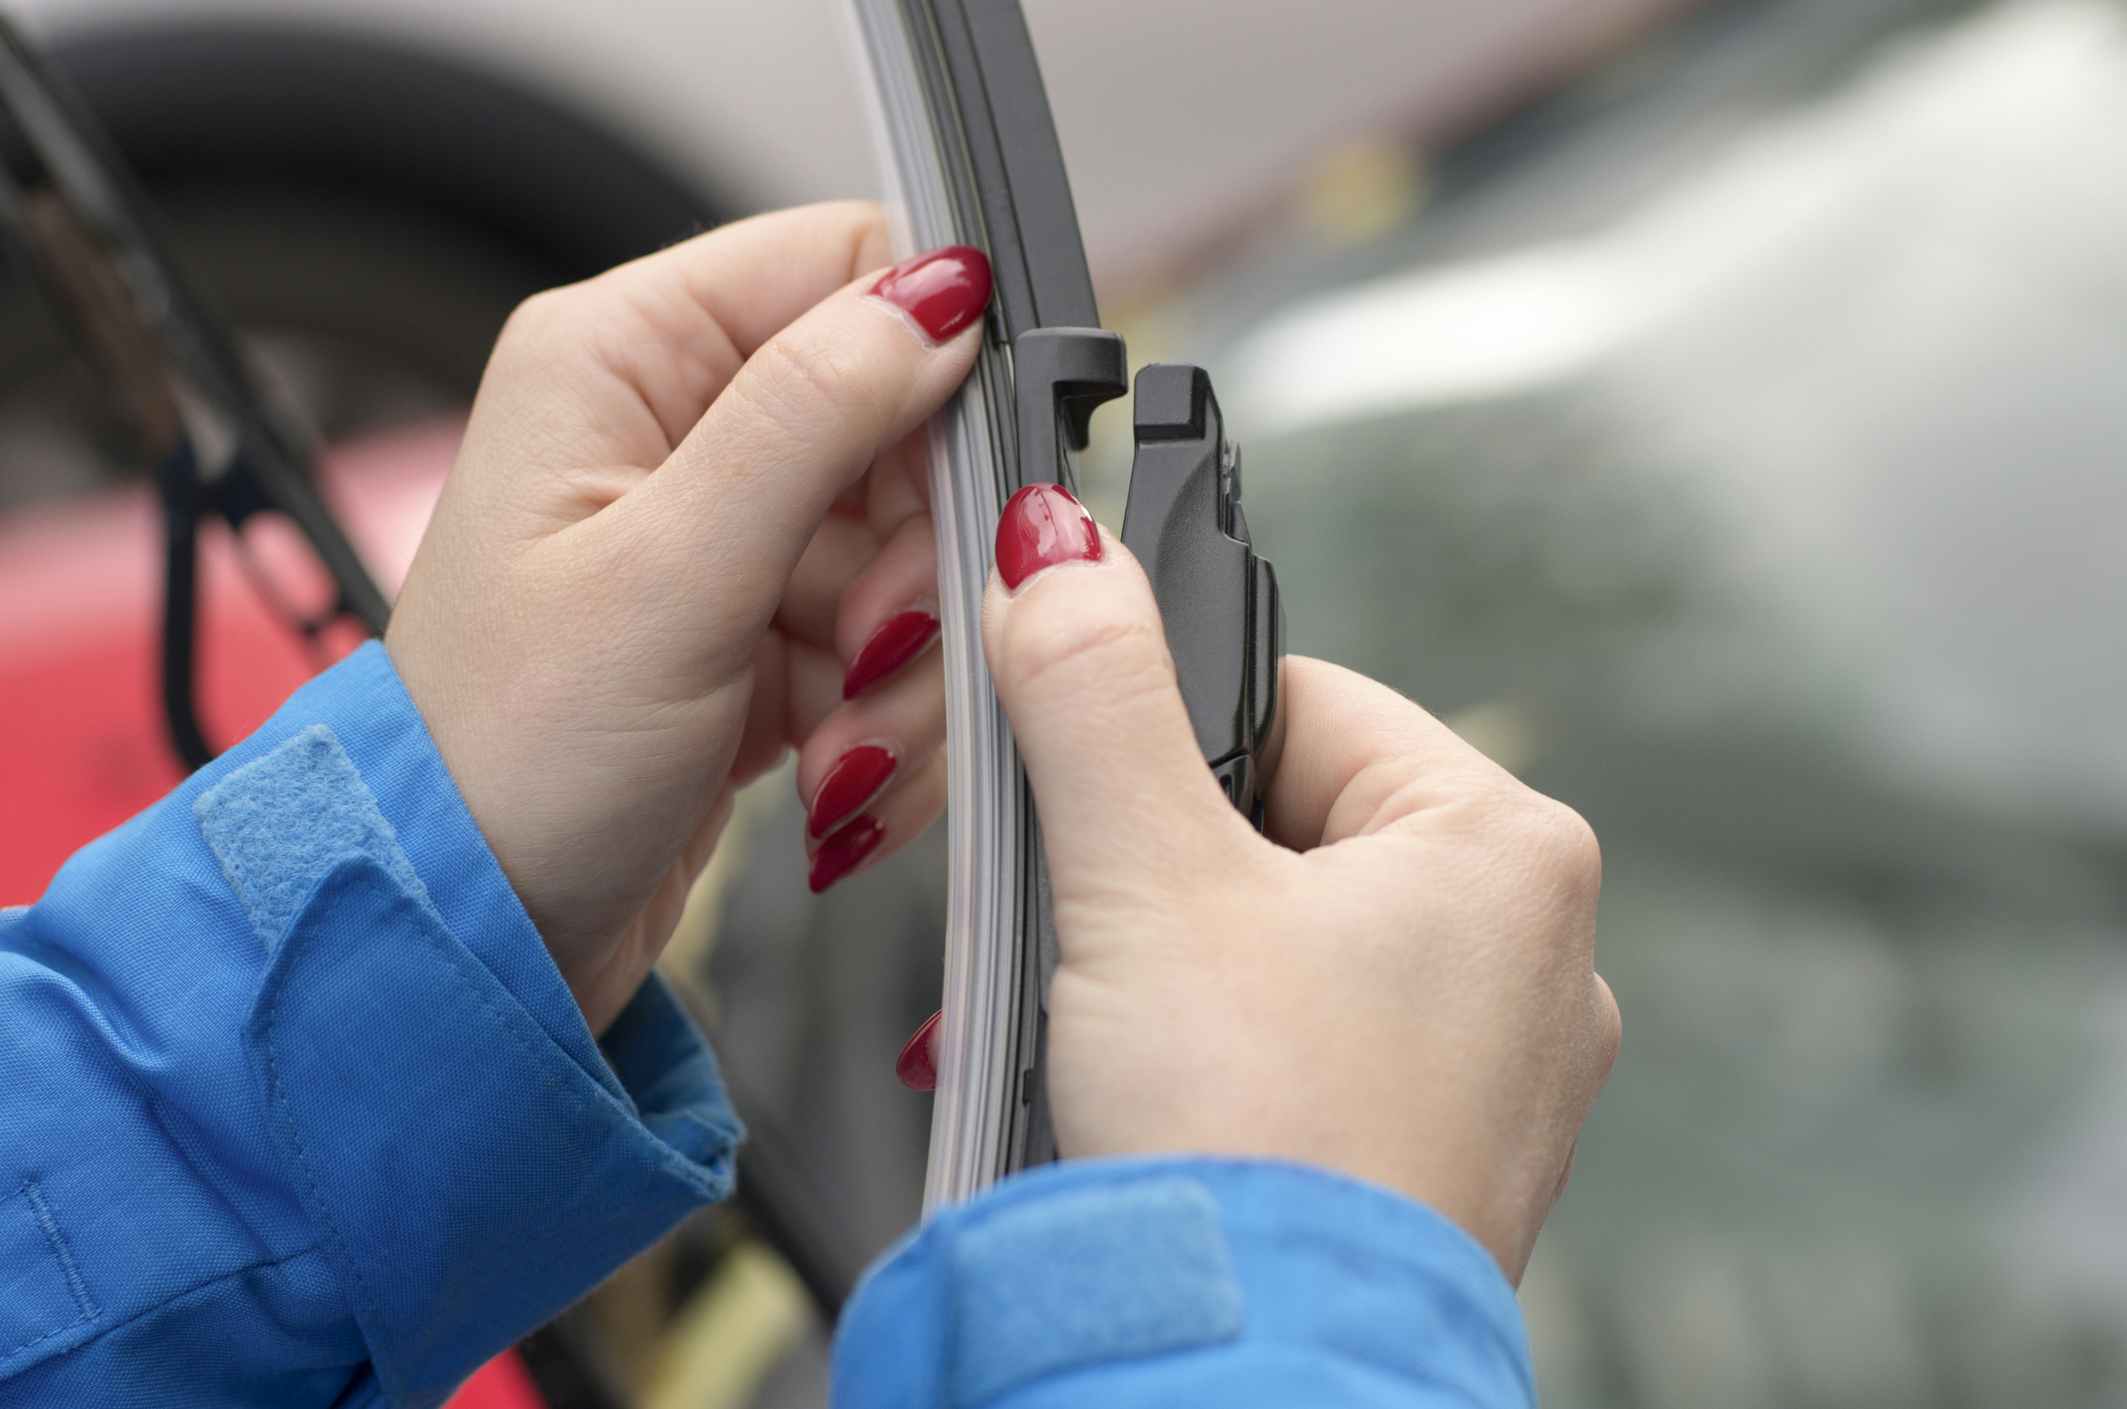 Young girl with red nails is preparing to put a new car windshield wiper brush to replace the old wiper blade